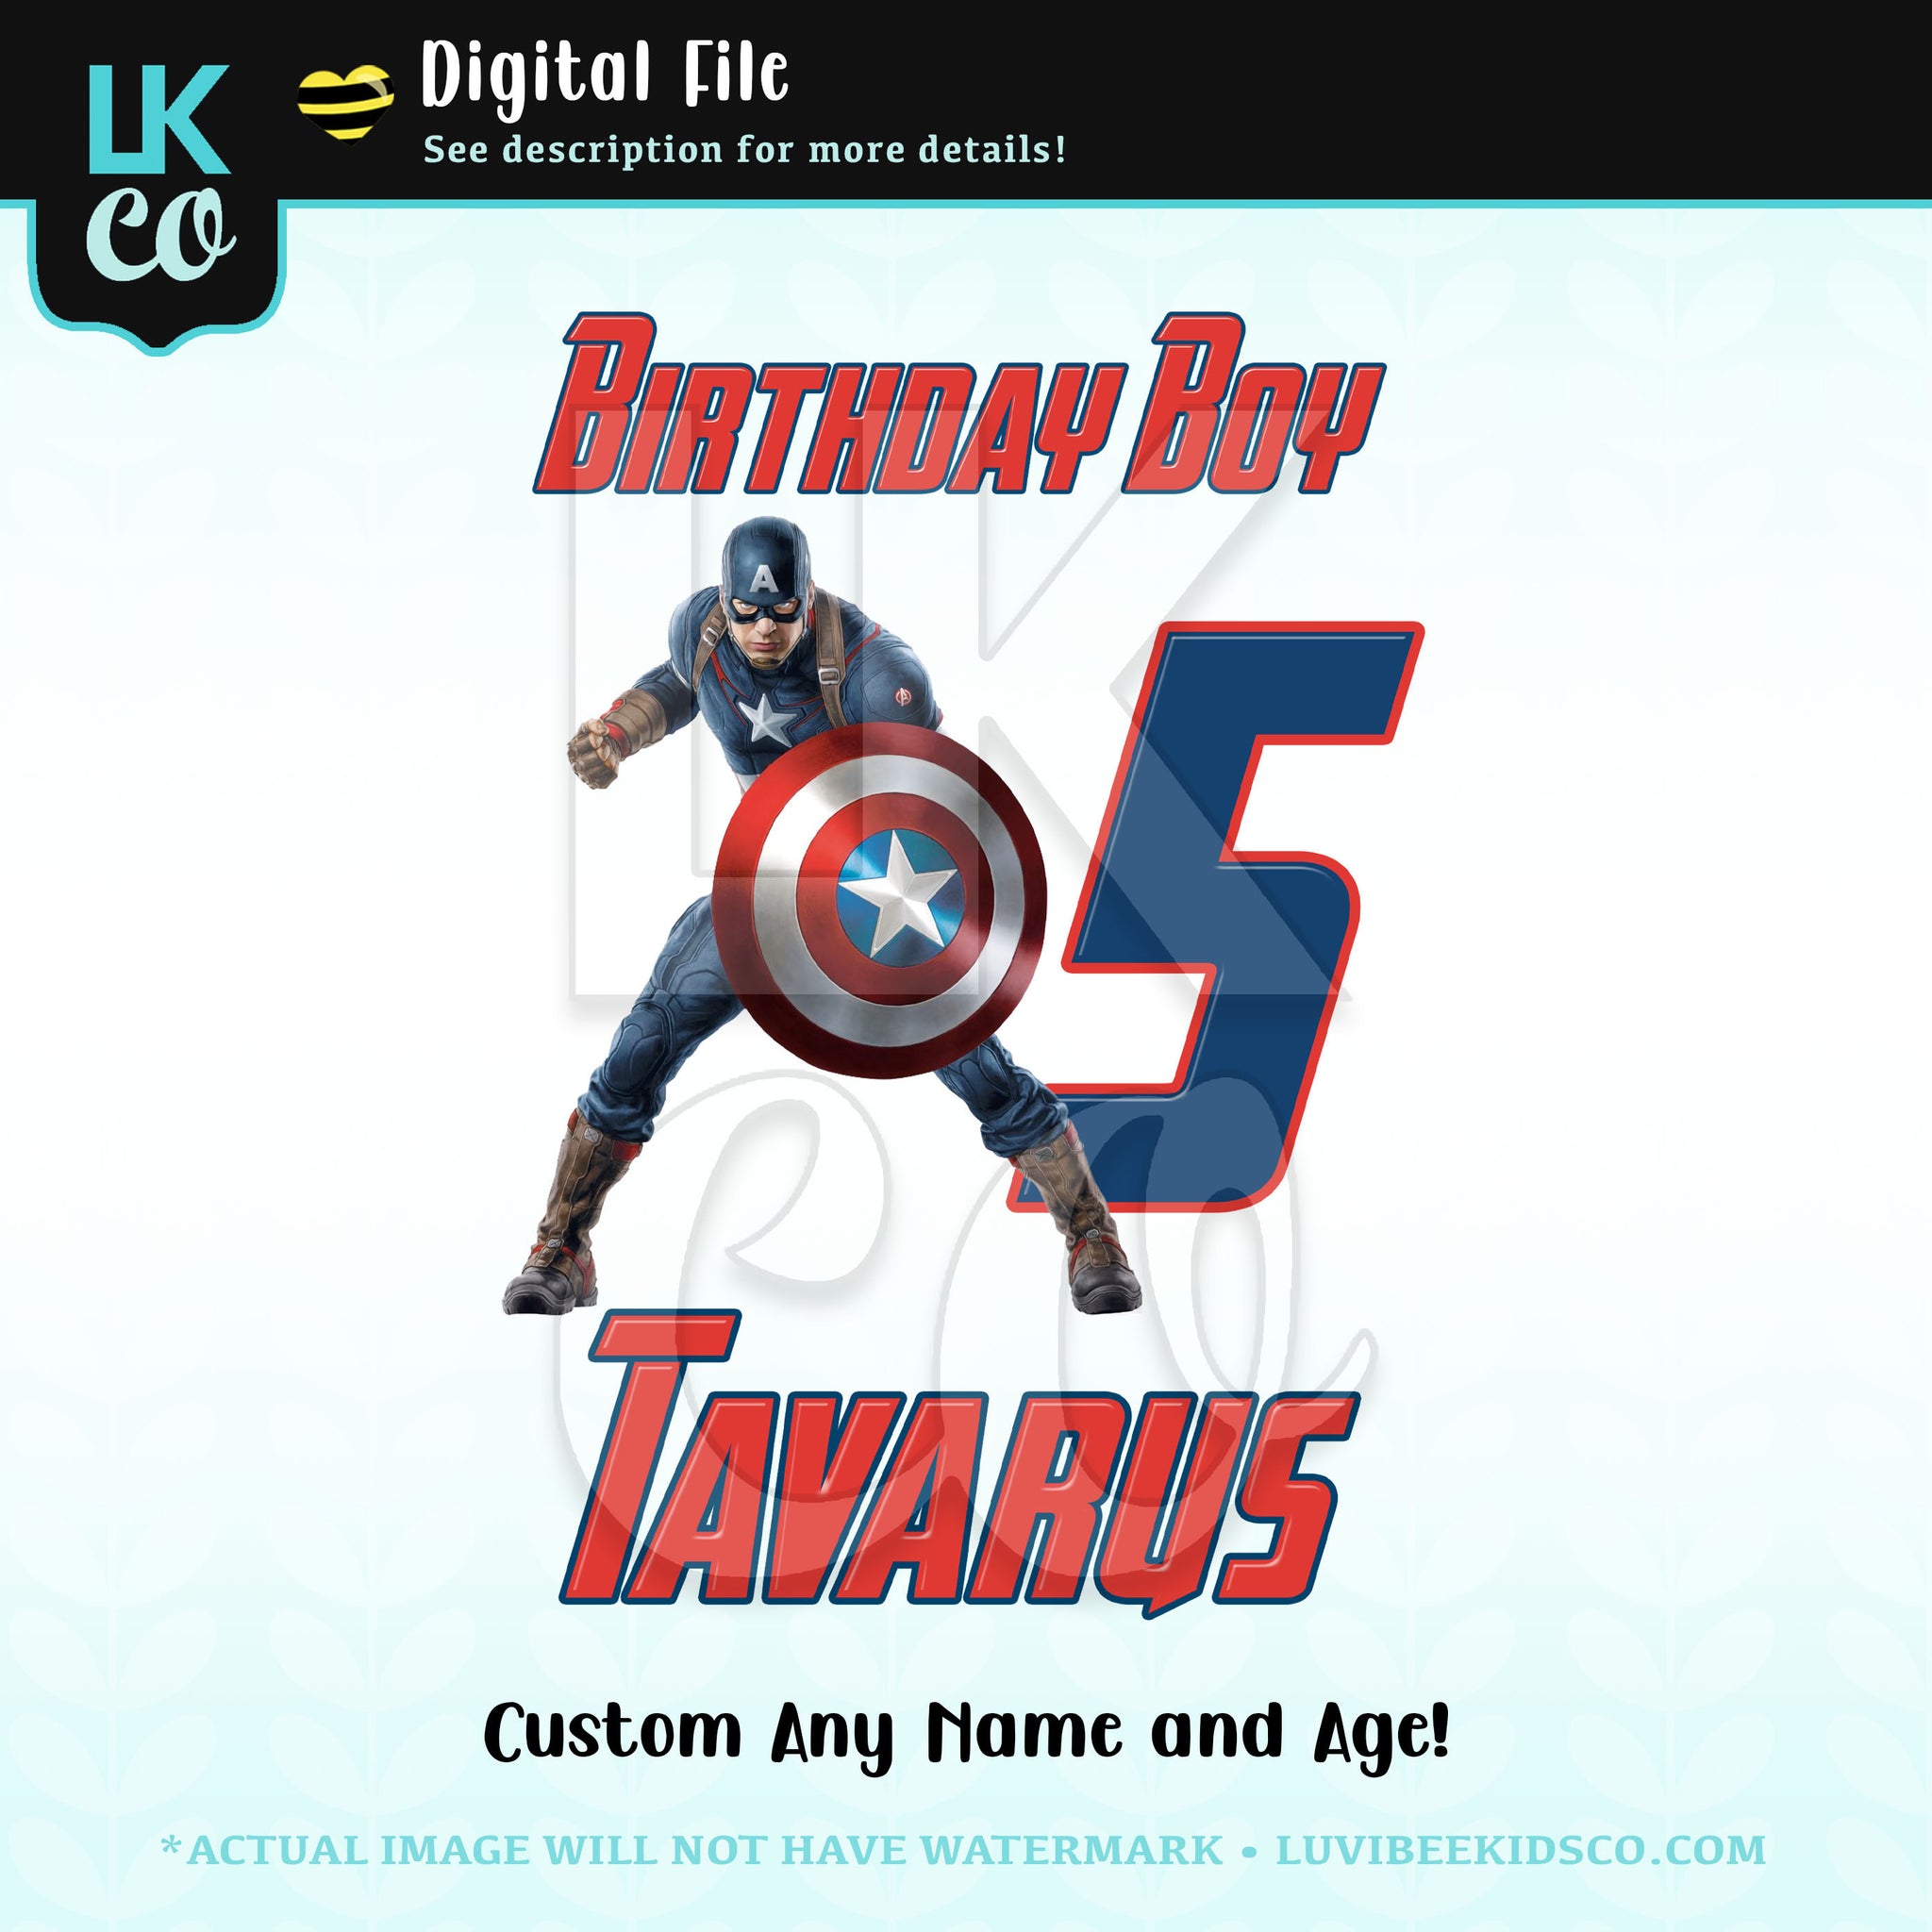 Captain America Digital File [12-24hr email] for Birthday and Events - Birthday Boy - Any Name and Age